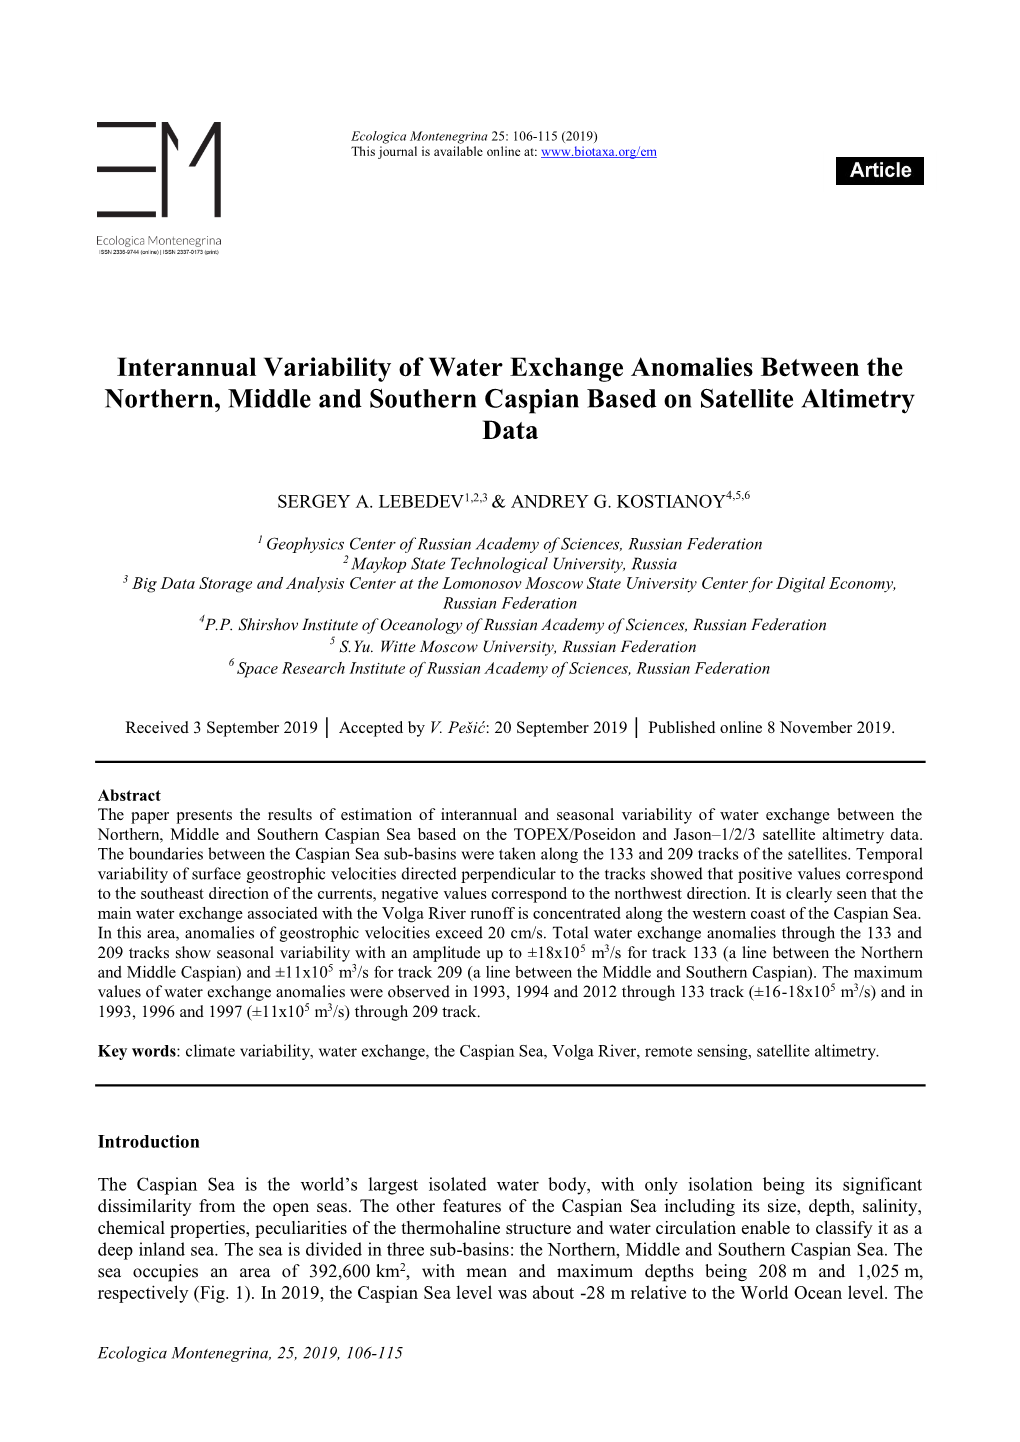 Interannual Variability of Water Exchange Anomalies Between the Northern, Middle and Southern Caspian Based on Satellite Altimetry Data